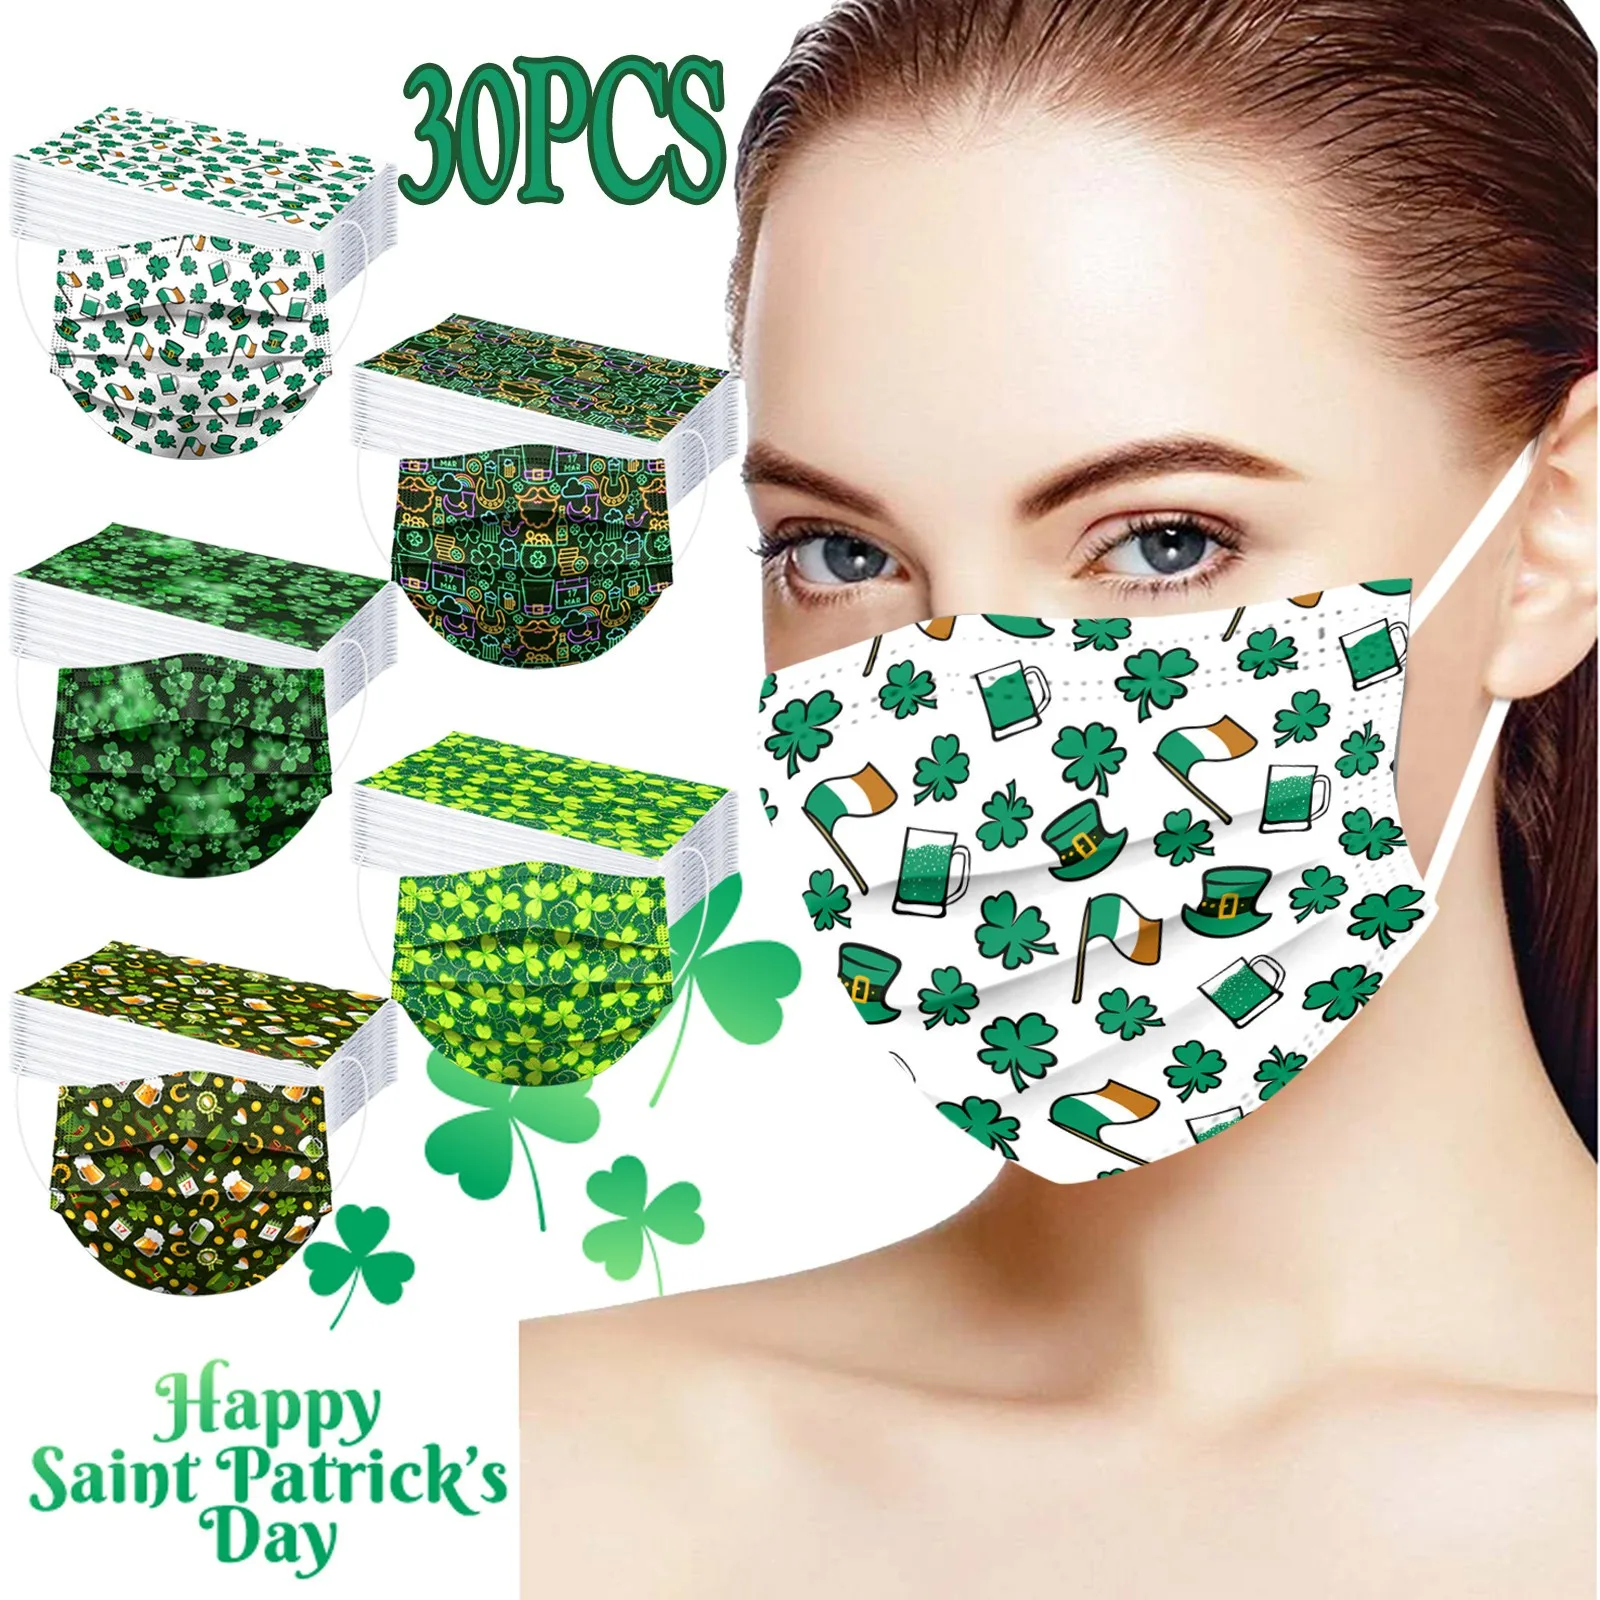 

30PCS Adult St. Patrick' Day Disposable Face Mask 3 Ply Earloop Anti-PM2.5 Masks New style woven mask Adult Three Layer Máscara